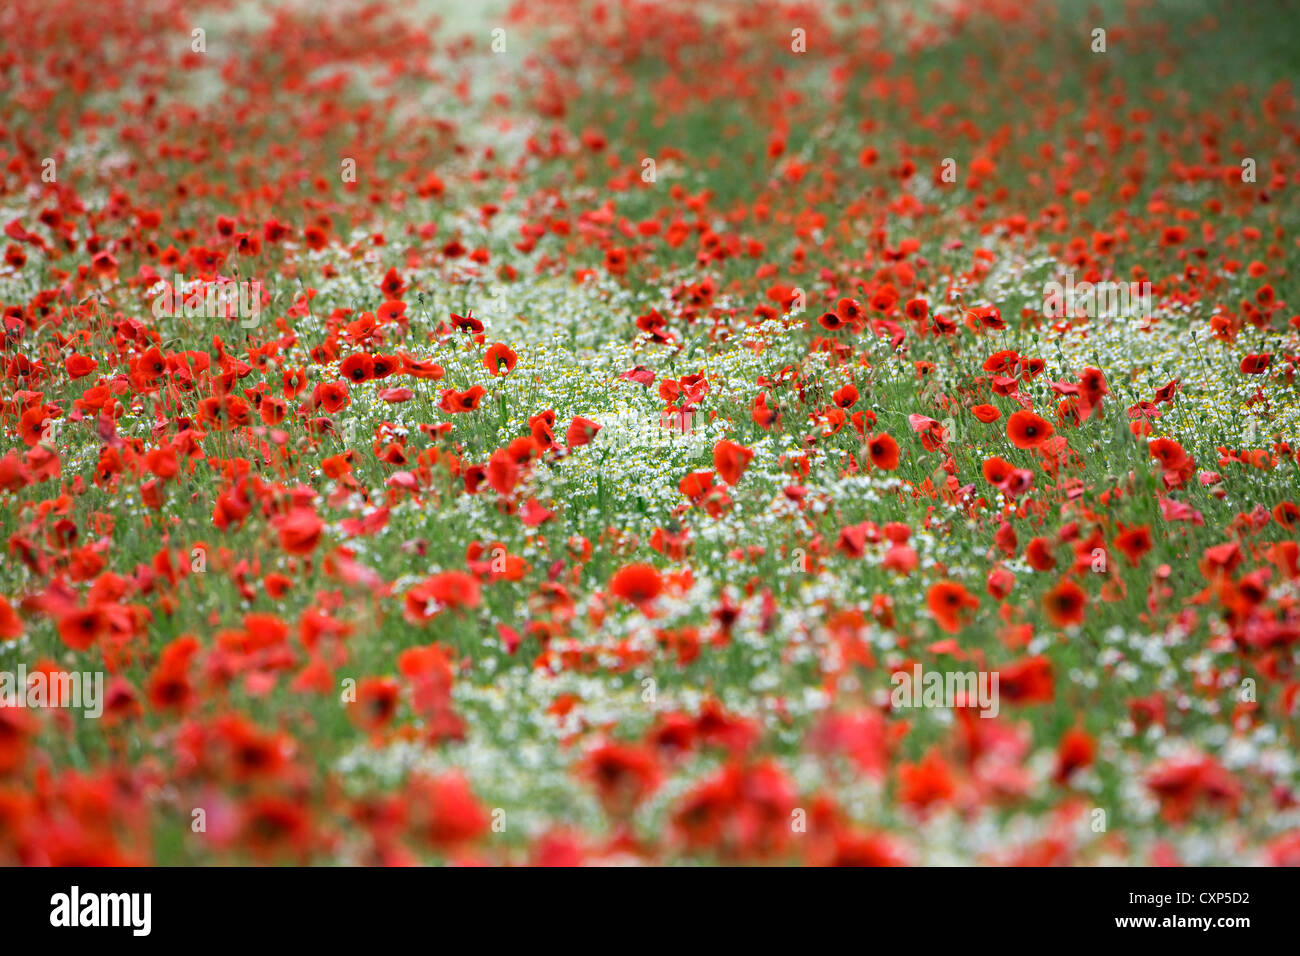 Field with red poppies (Papaver rhoeas) and colourful wildflowers in spring Stock Photo